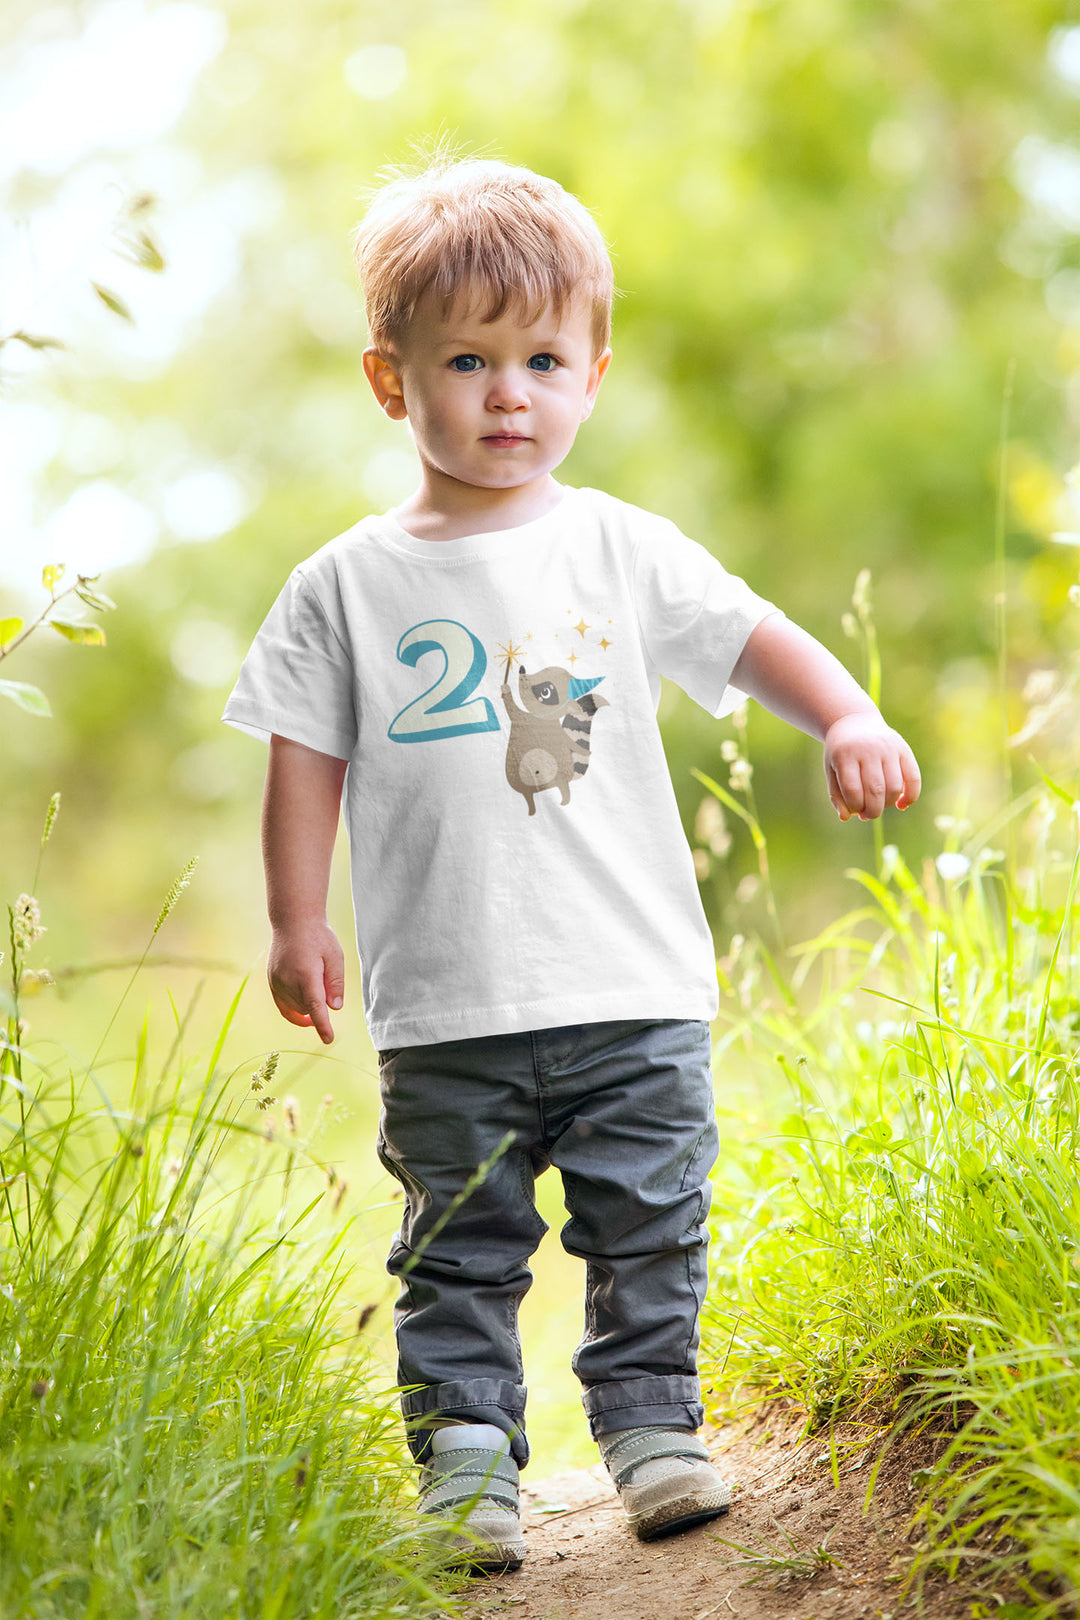 2 Year Birthday Cute Meercat Blue. Short Sleeve T Shirt For Toddler And Kids. - TeesForToddlersandKids -  t-shirt - birthday - 2-year-birthday-cute-meercat-blue-short-sleeve-t-shirt-for-toddler-and-kids